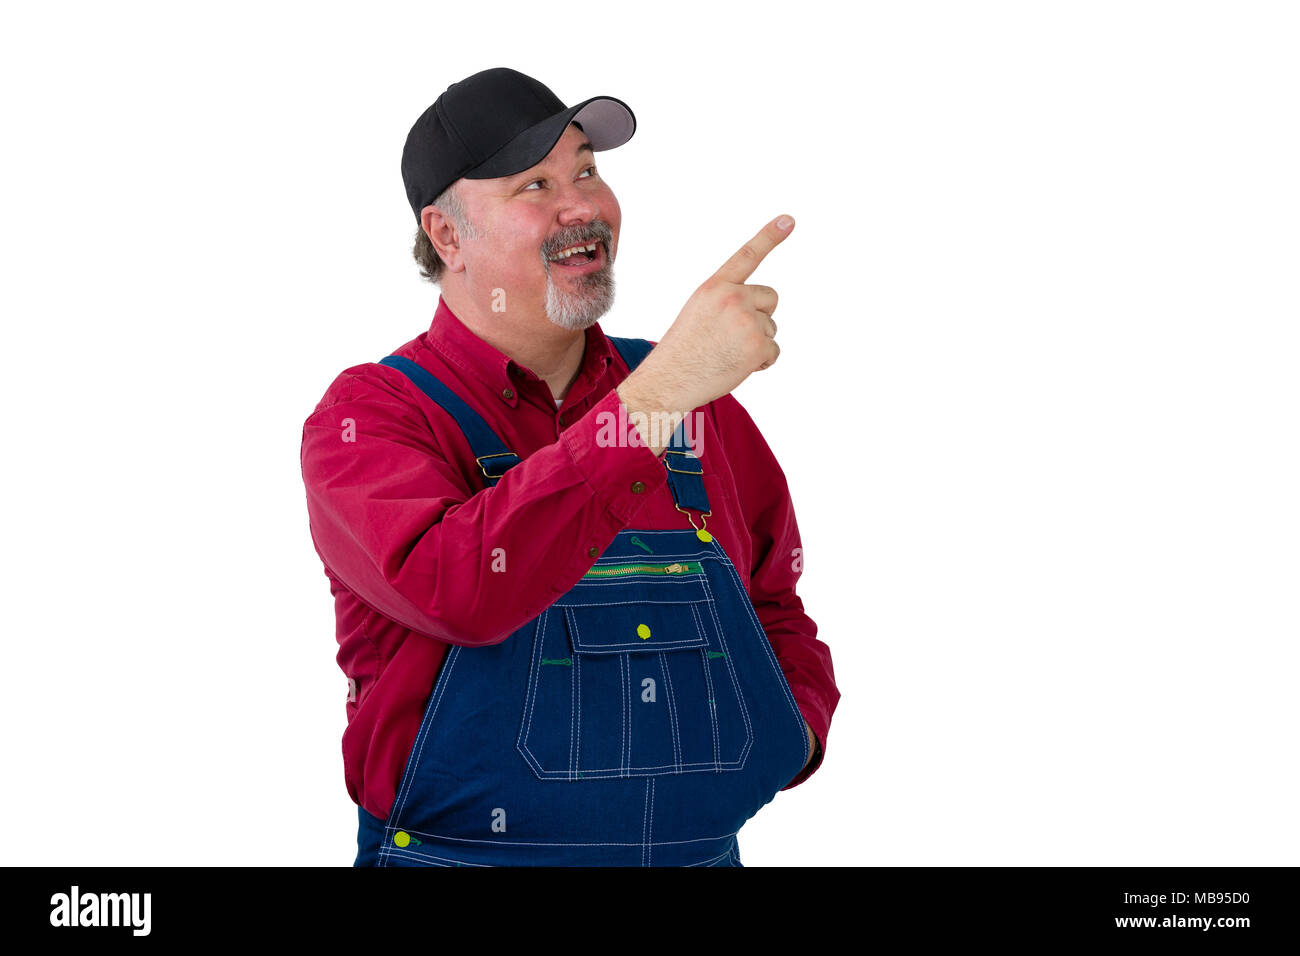 Pleased happy man in denim dungarees pointing up drawing your attention towards blank white copy space with a beaming smile Stock Photo